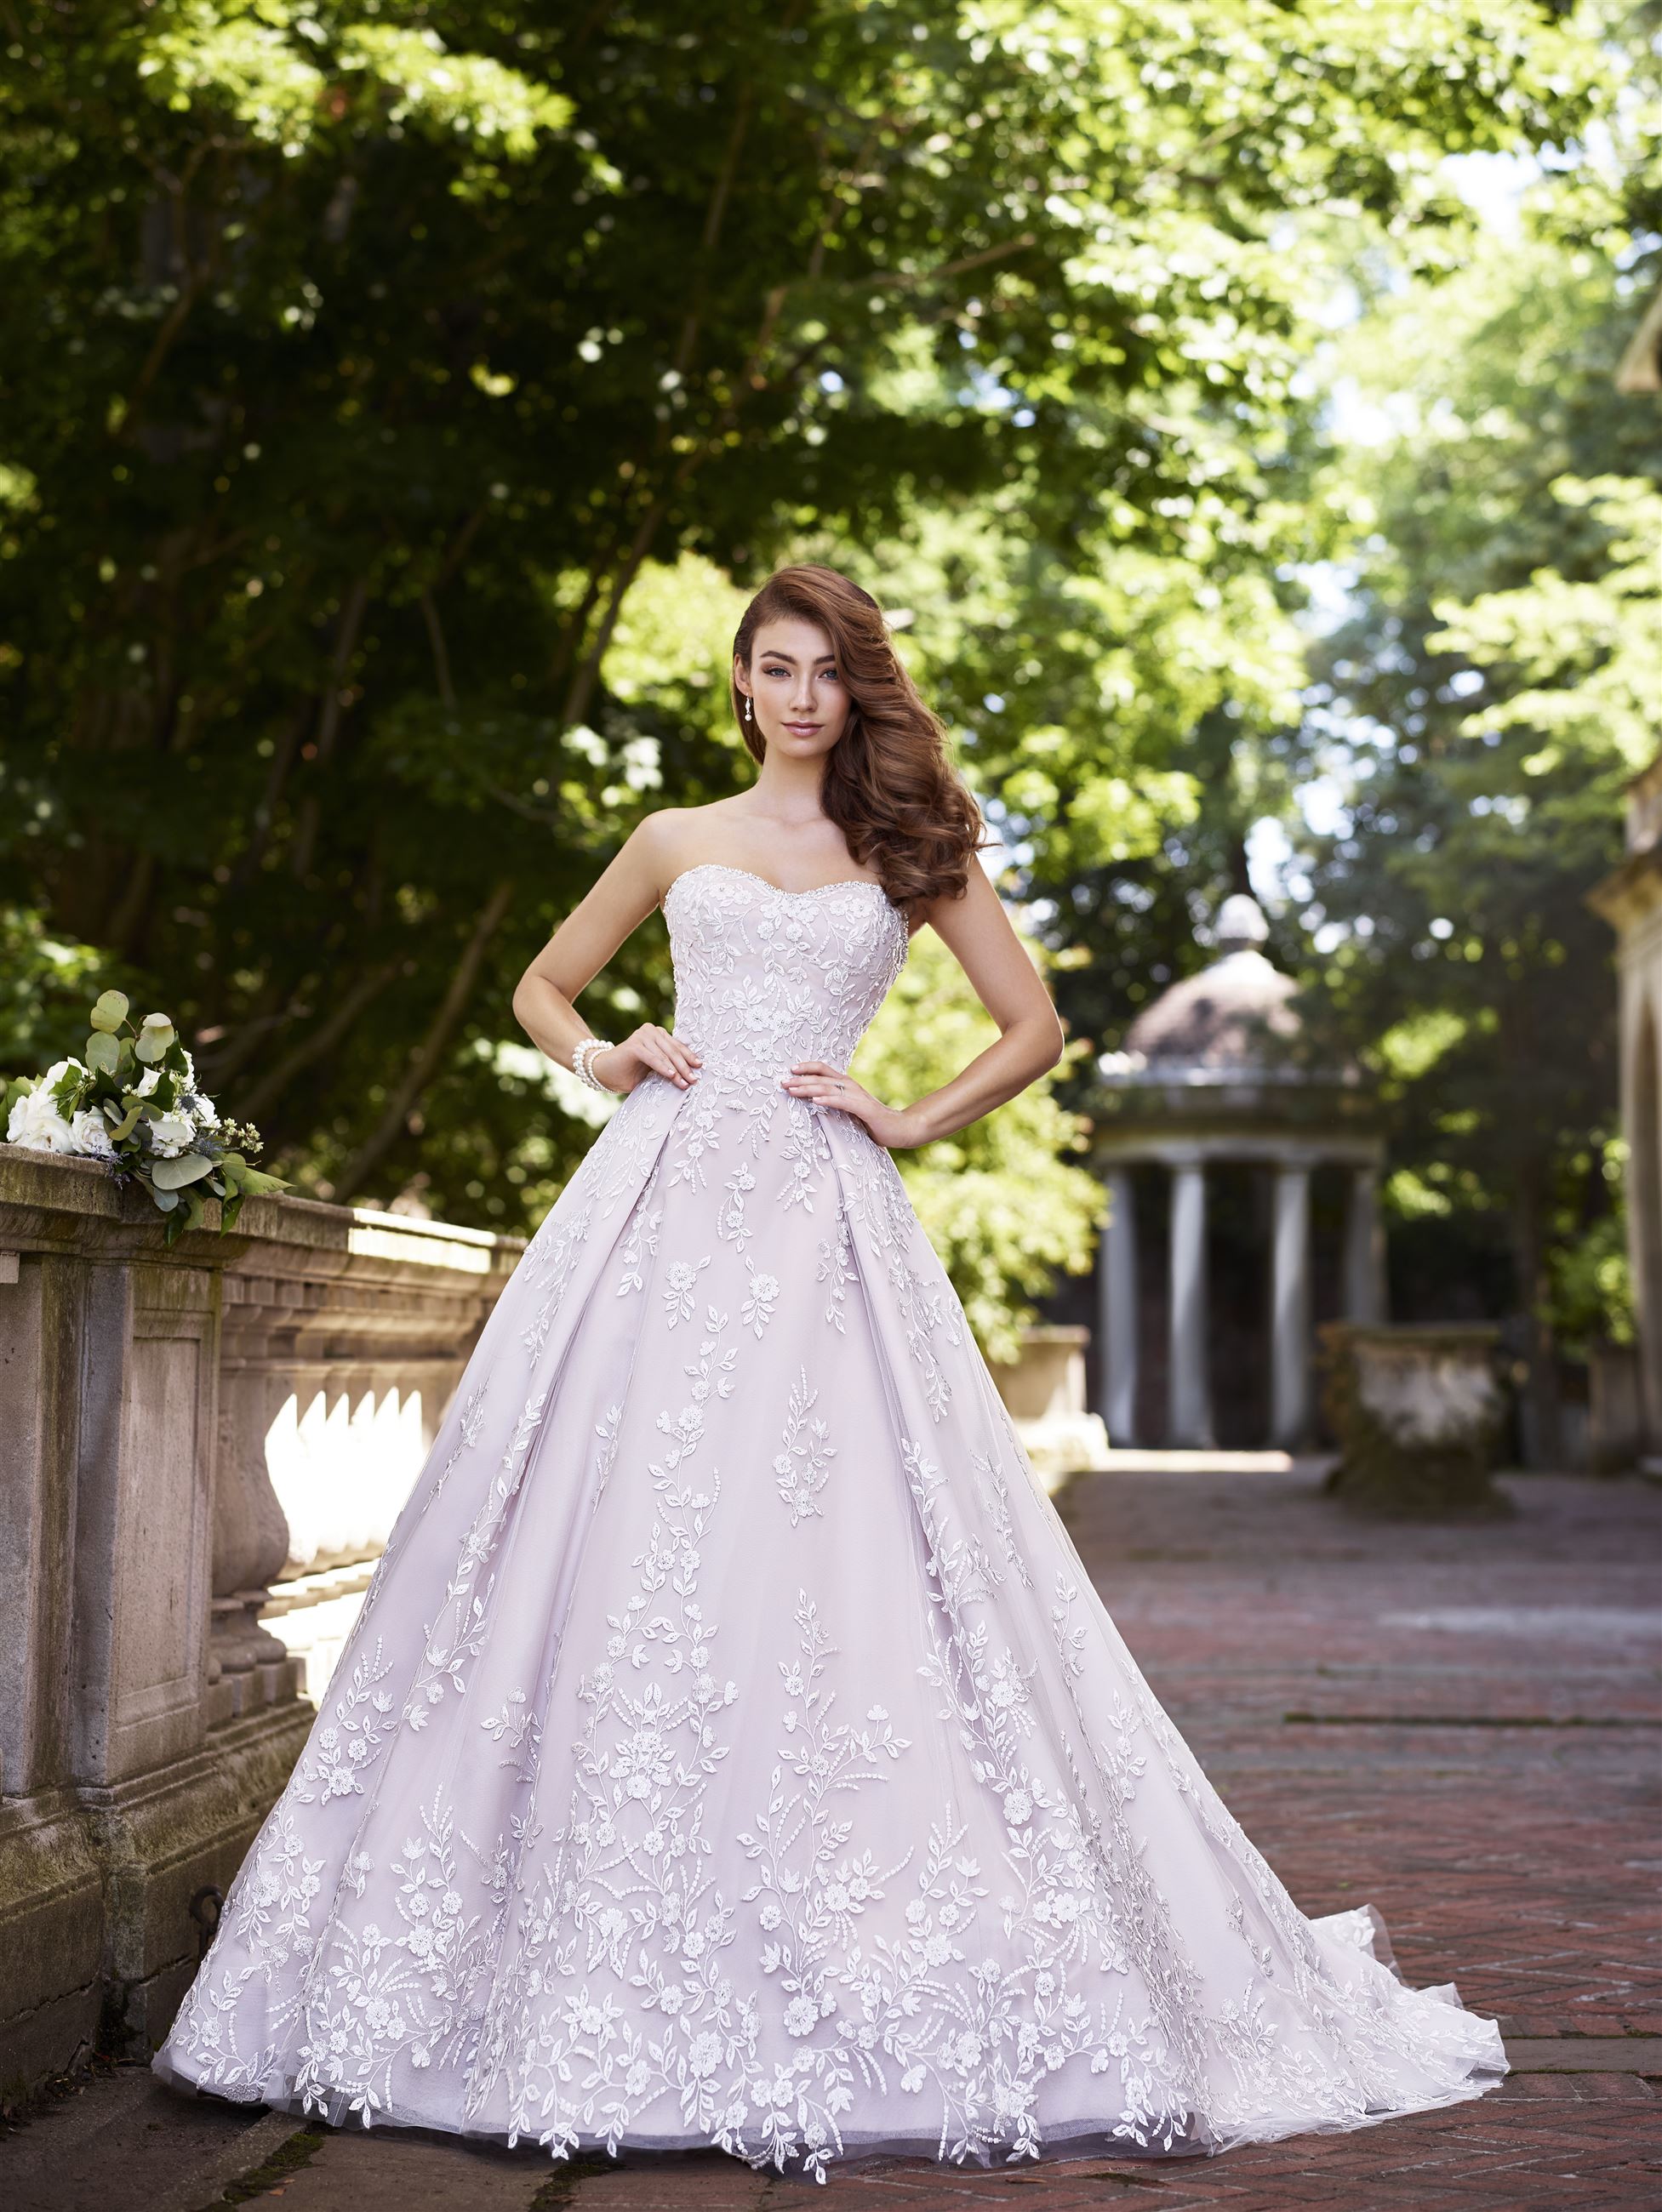 Bride wearing floral lace ball gown wedding dress